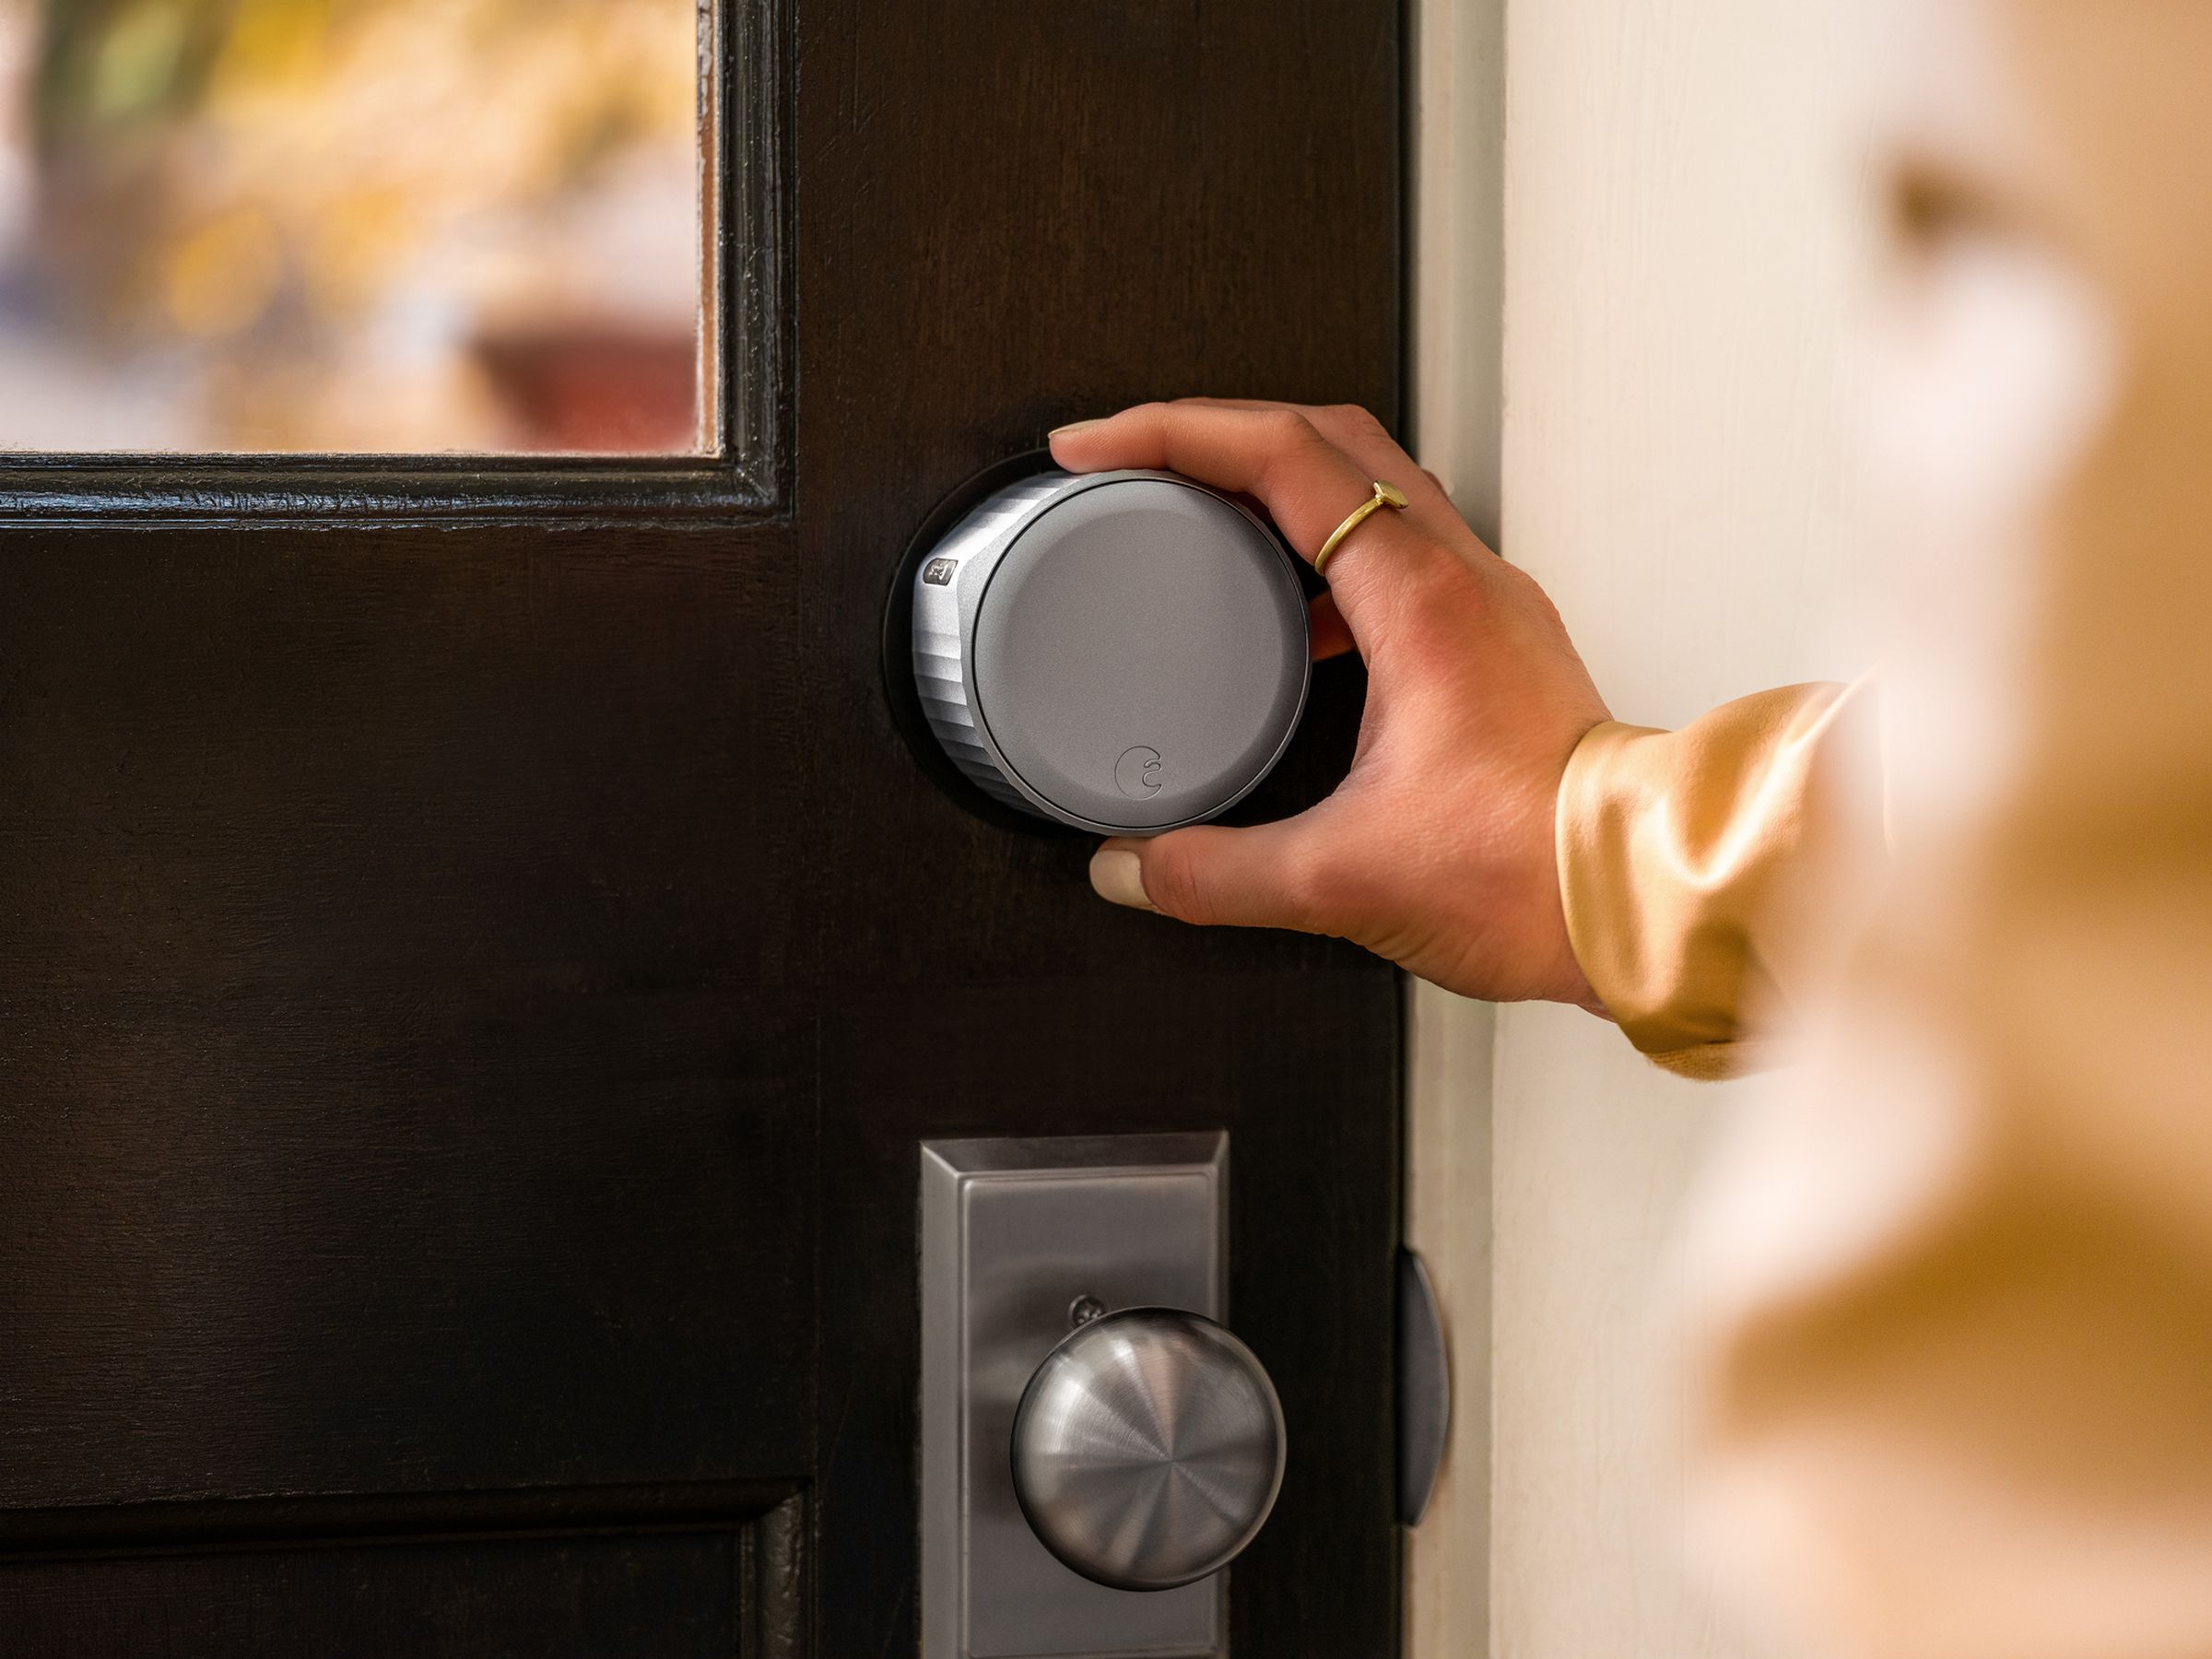 An August Wi-Fi Smart Lock being used to lock the door.